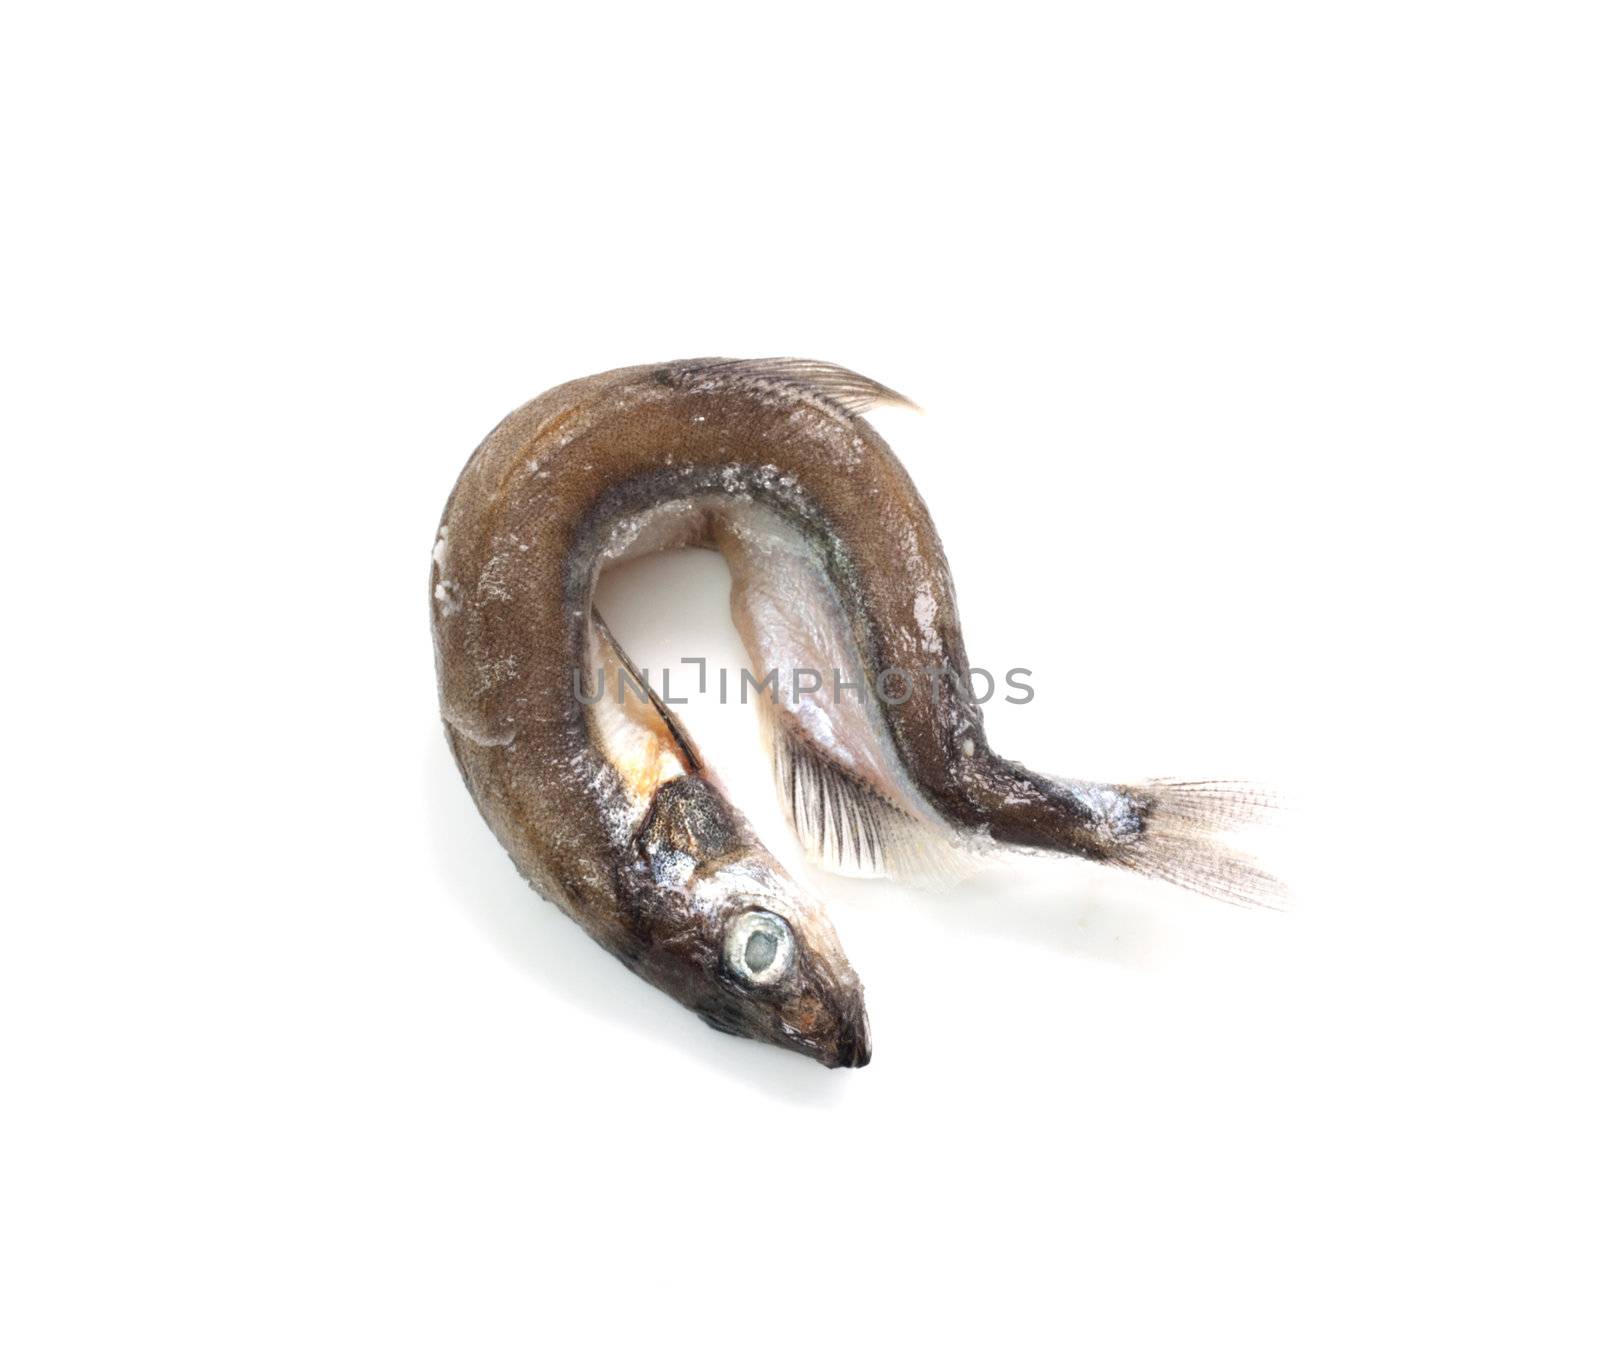 Capelin fish isolated on the white background 